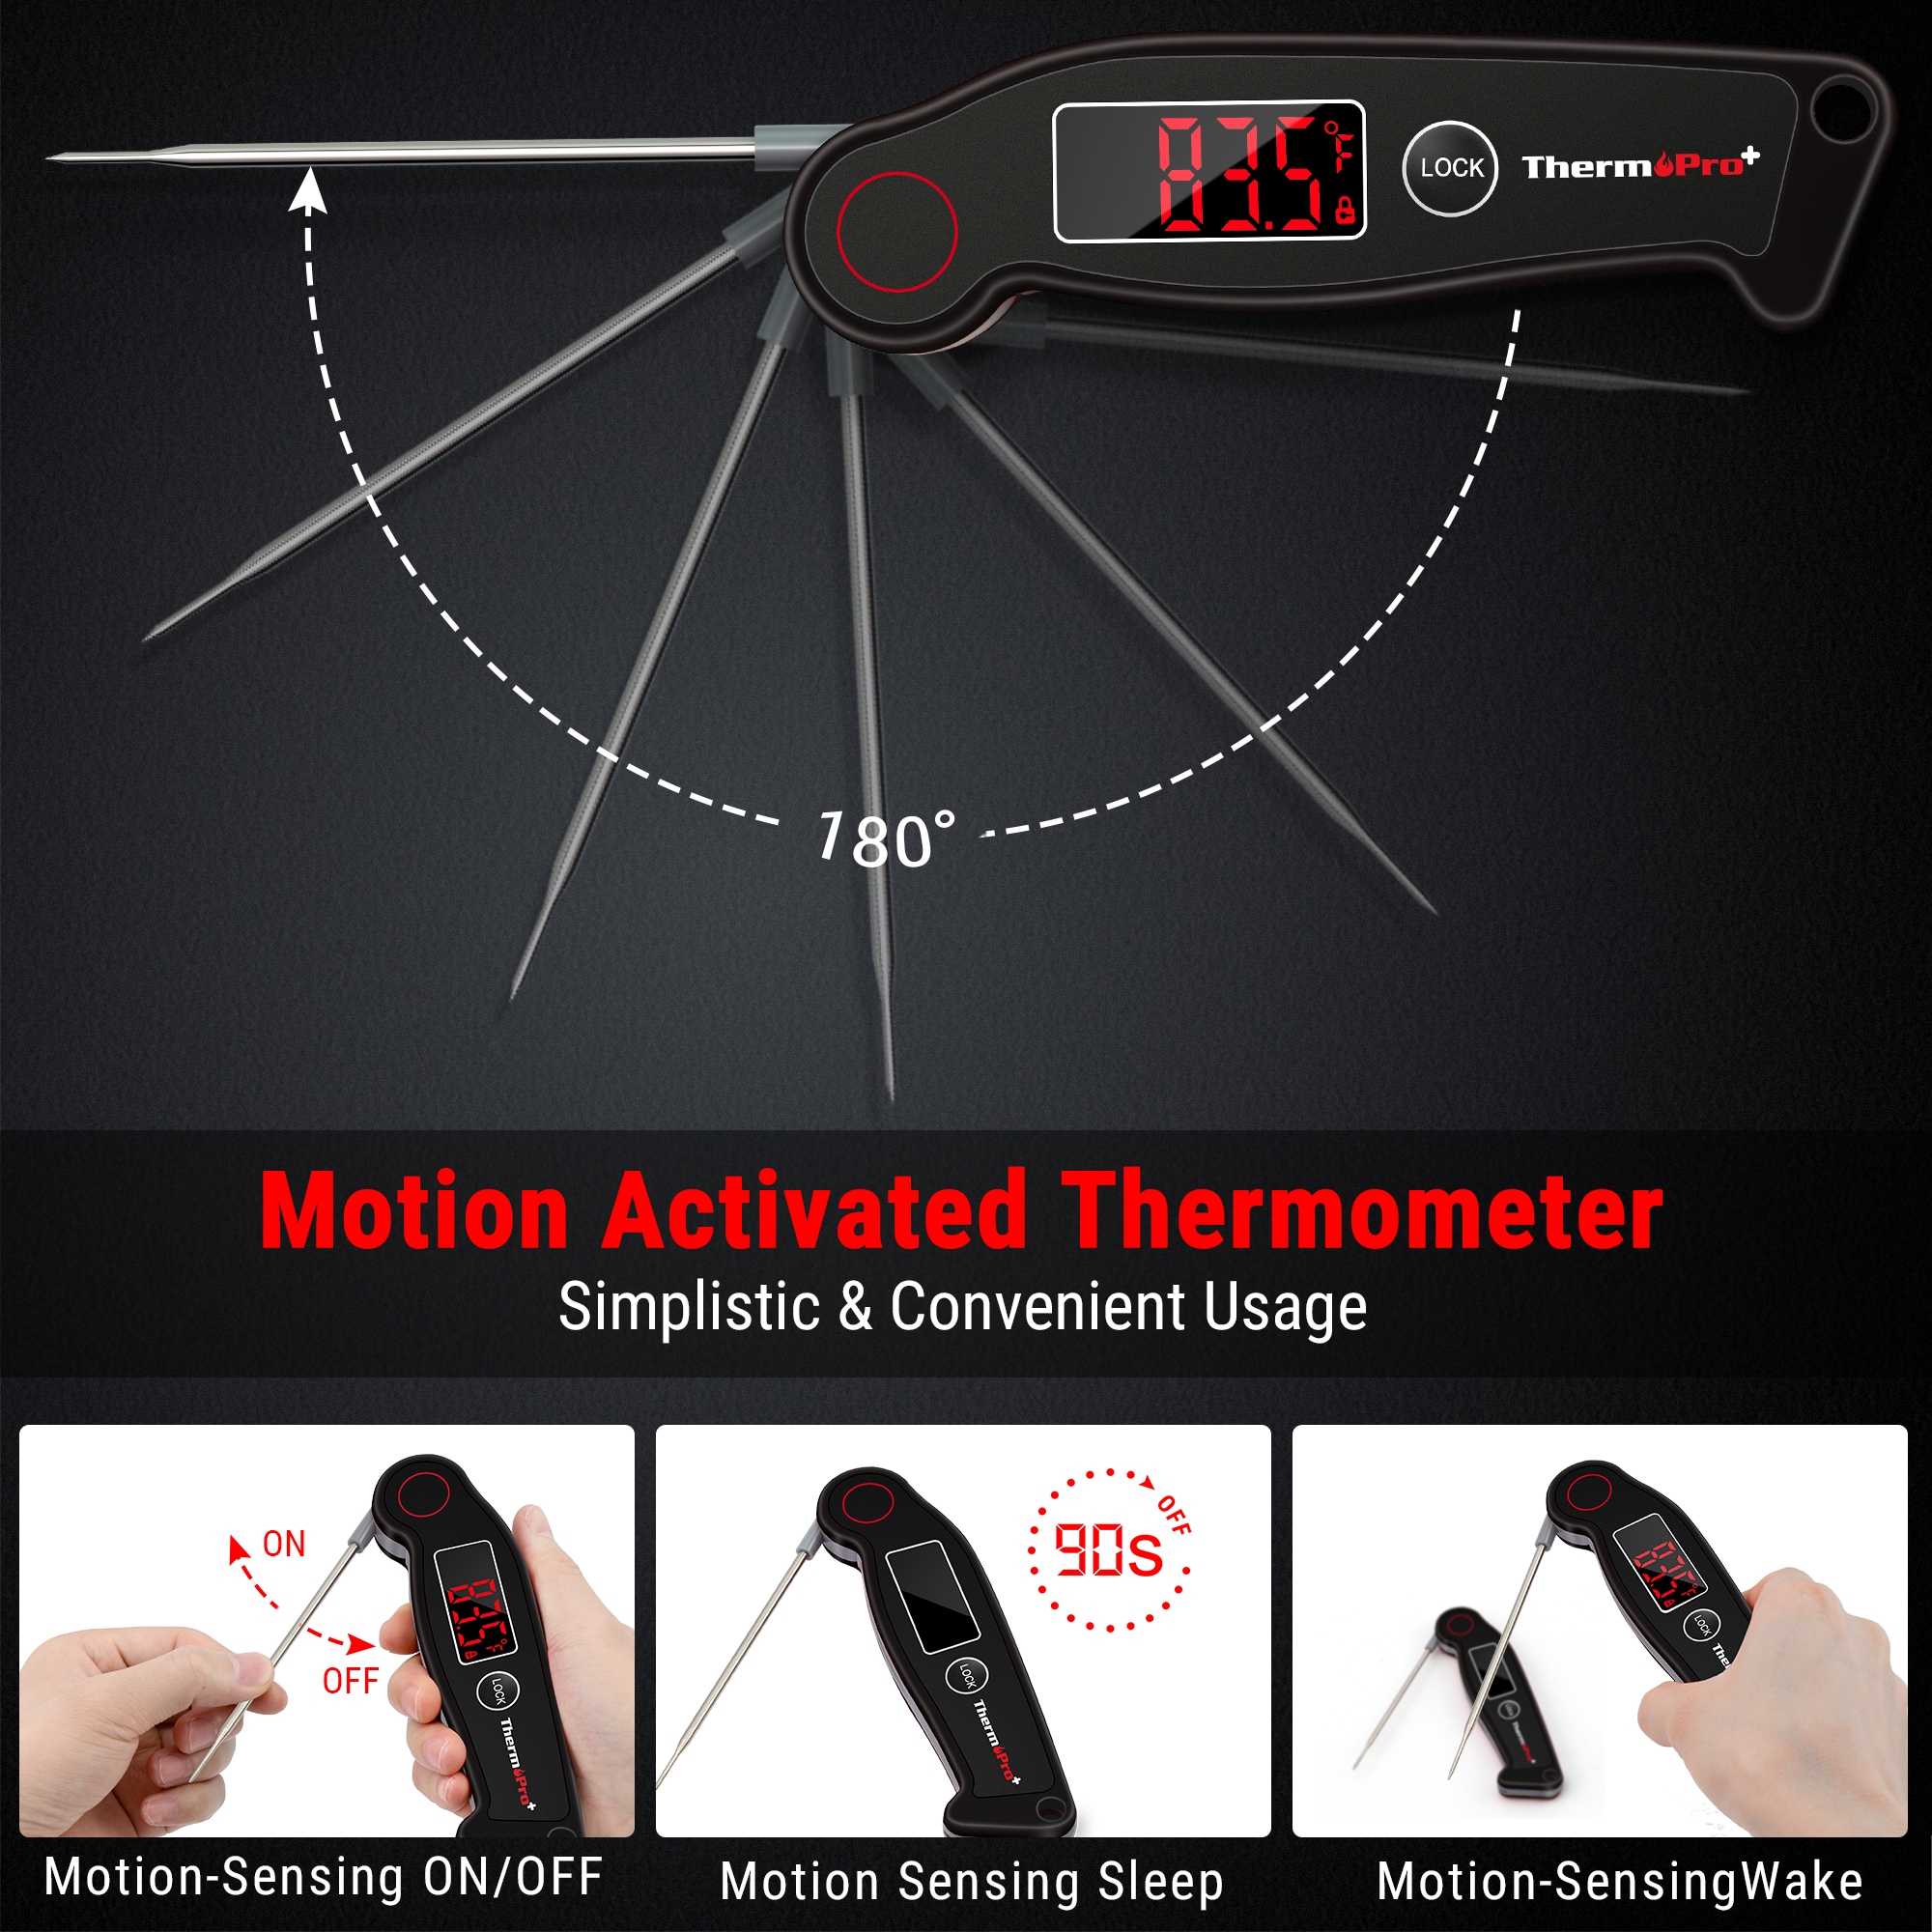 ThermoPro TP19 Waterproof Digital Probe Meat Thermometer in the